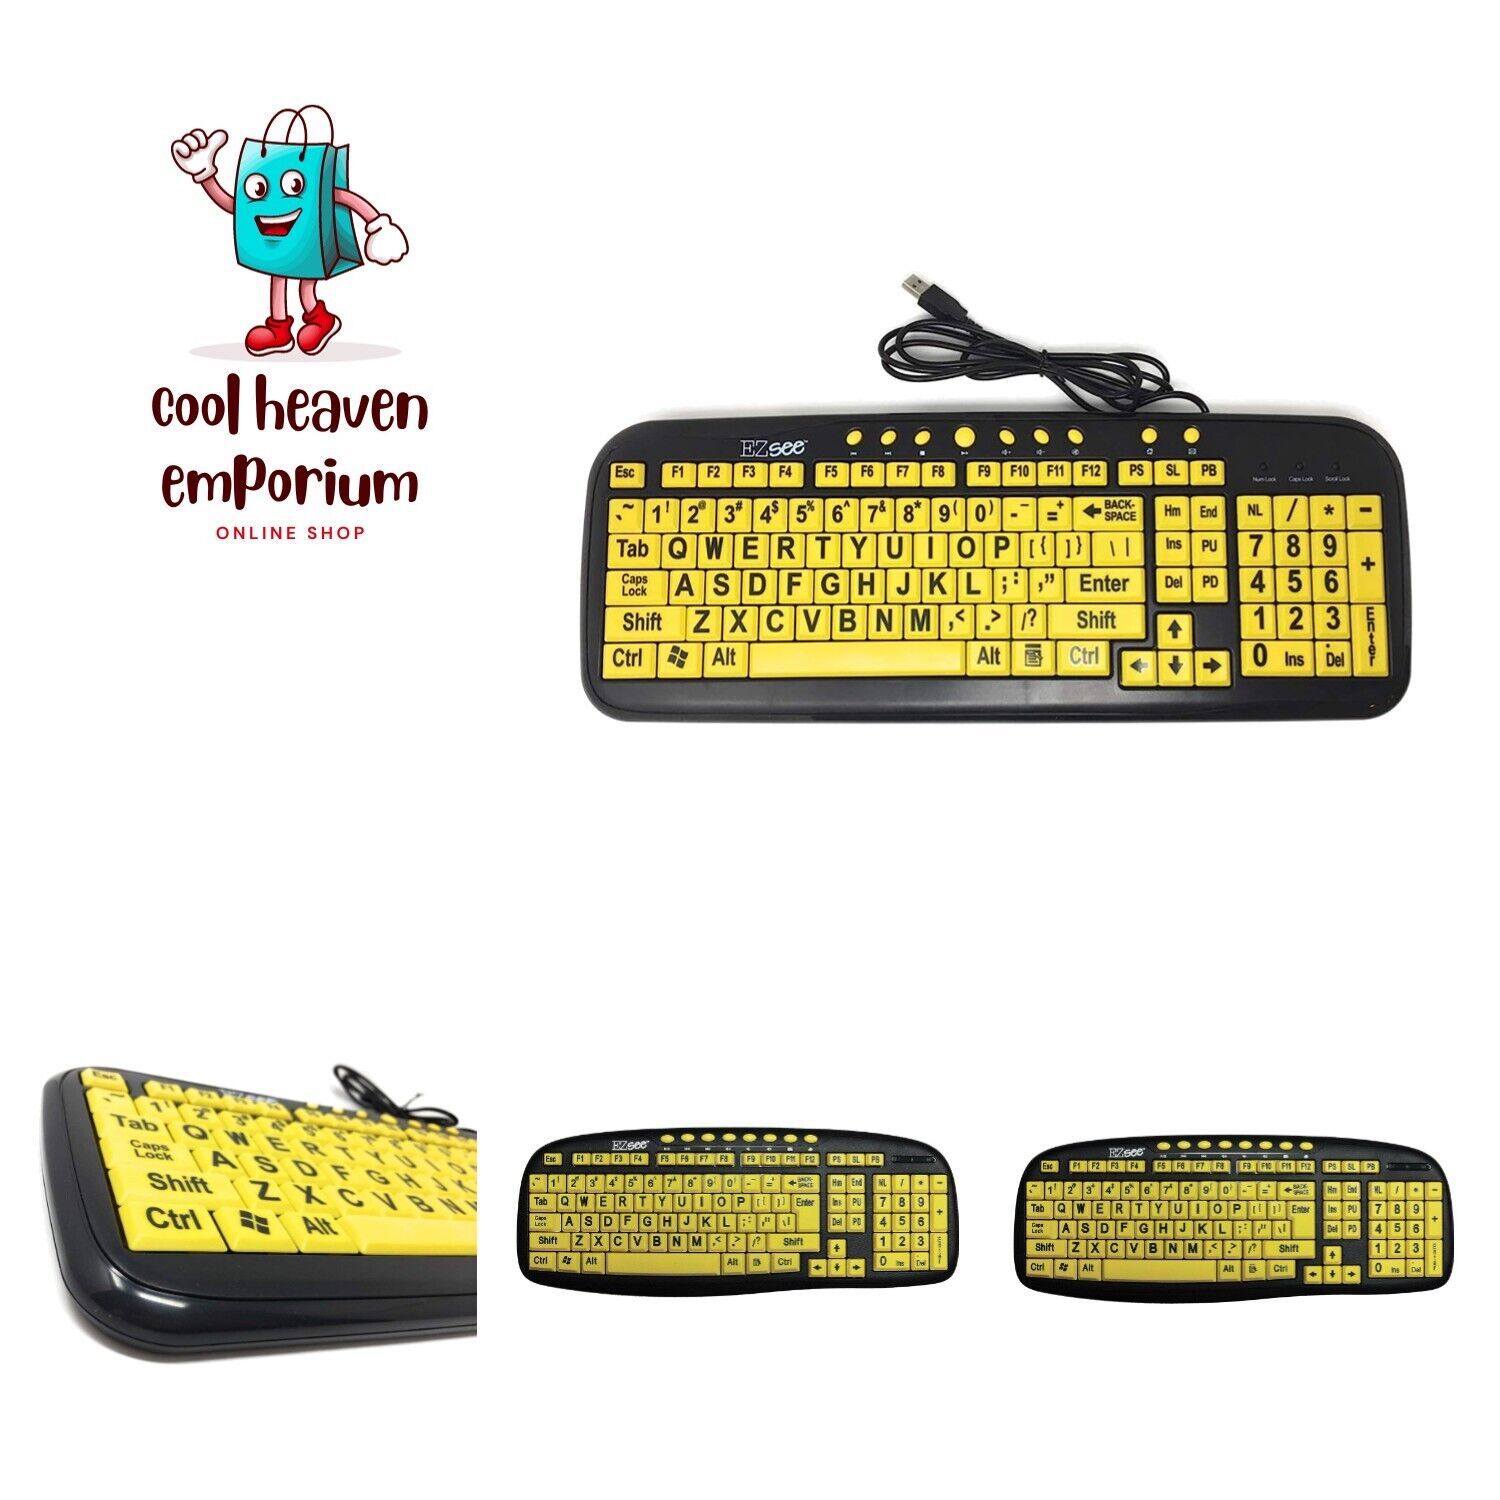 New and Improved: by DC - Large Print Computer Keyboard USB Wired Yellow Keys...